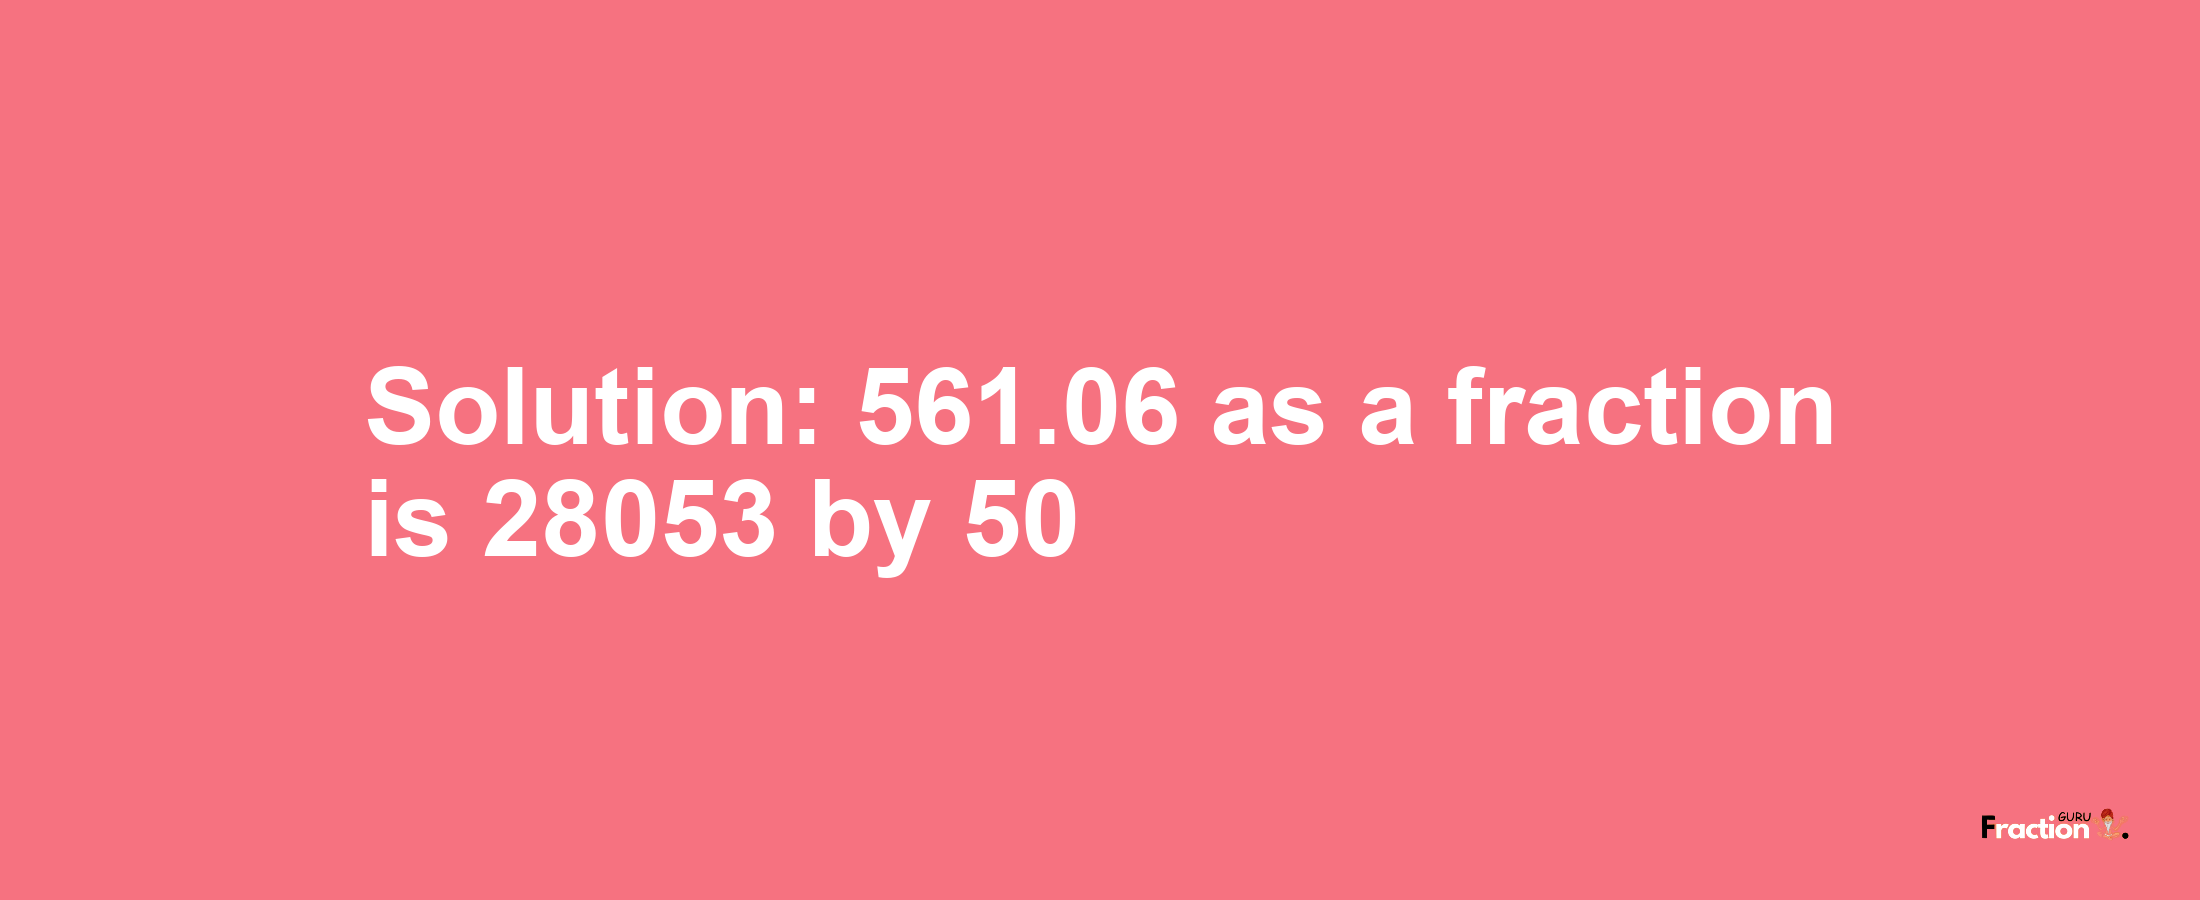 Solution:561.06 as a fraction is 28053/50